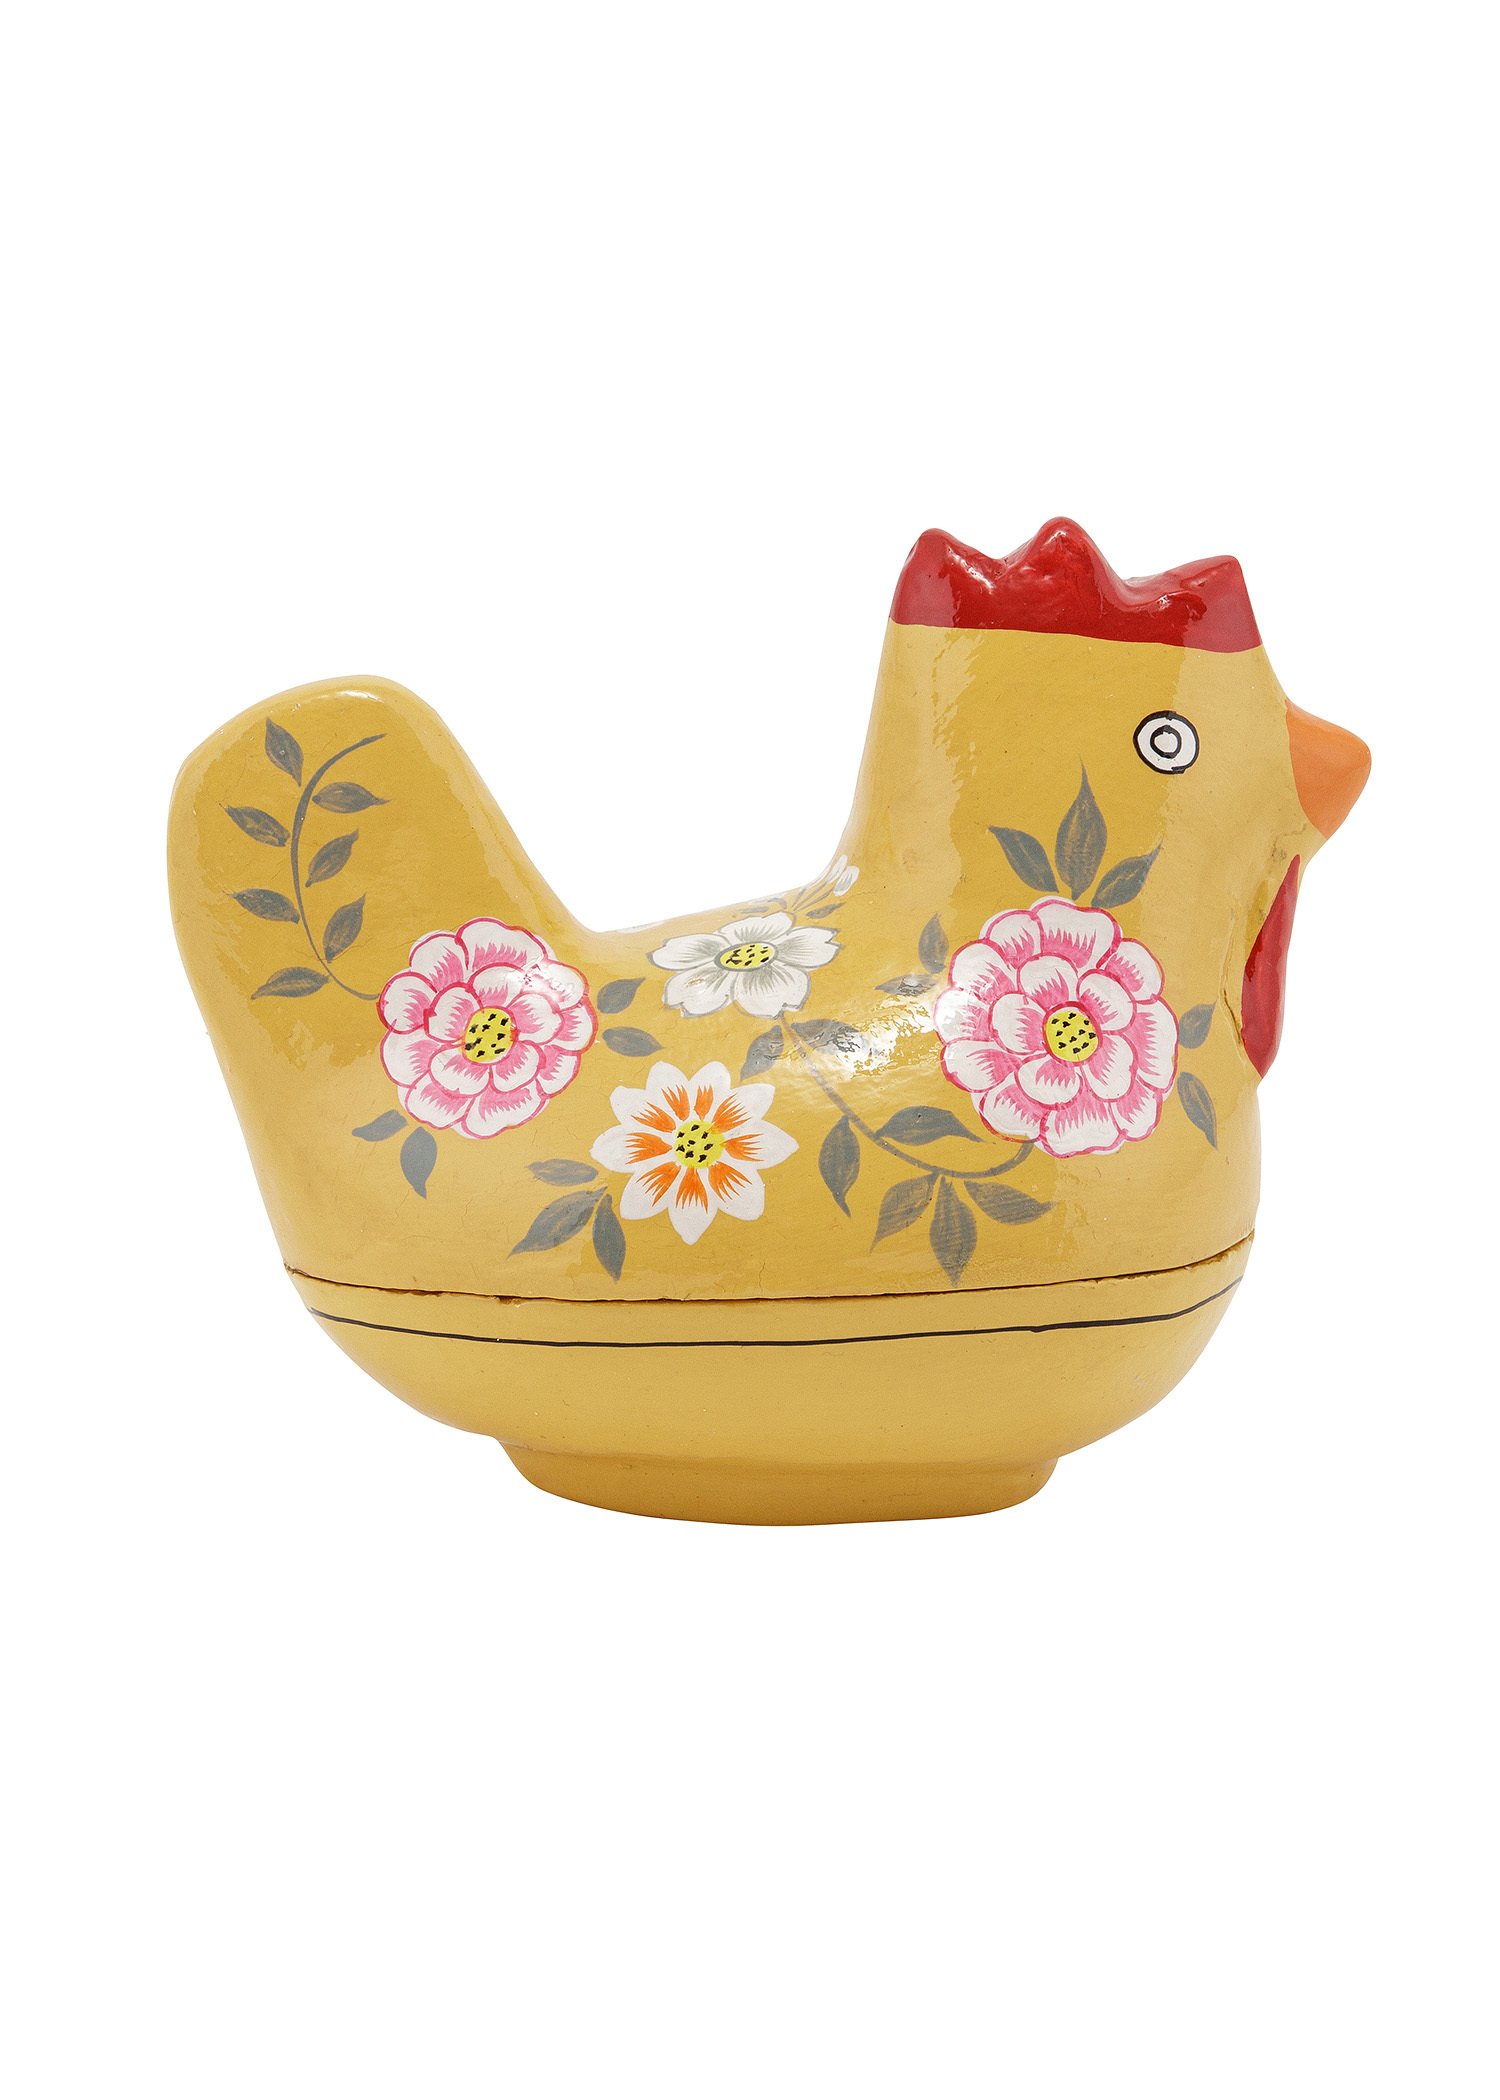 Easter chick shaped box